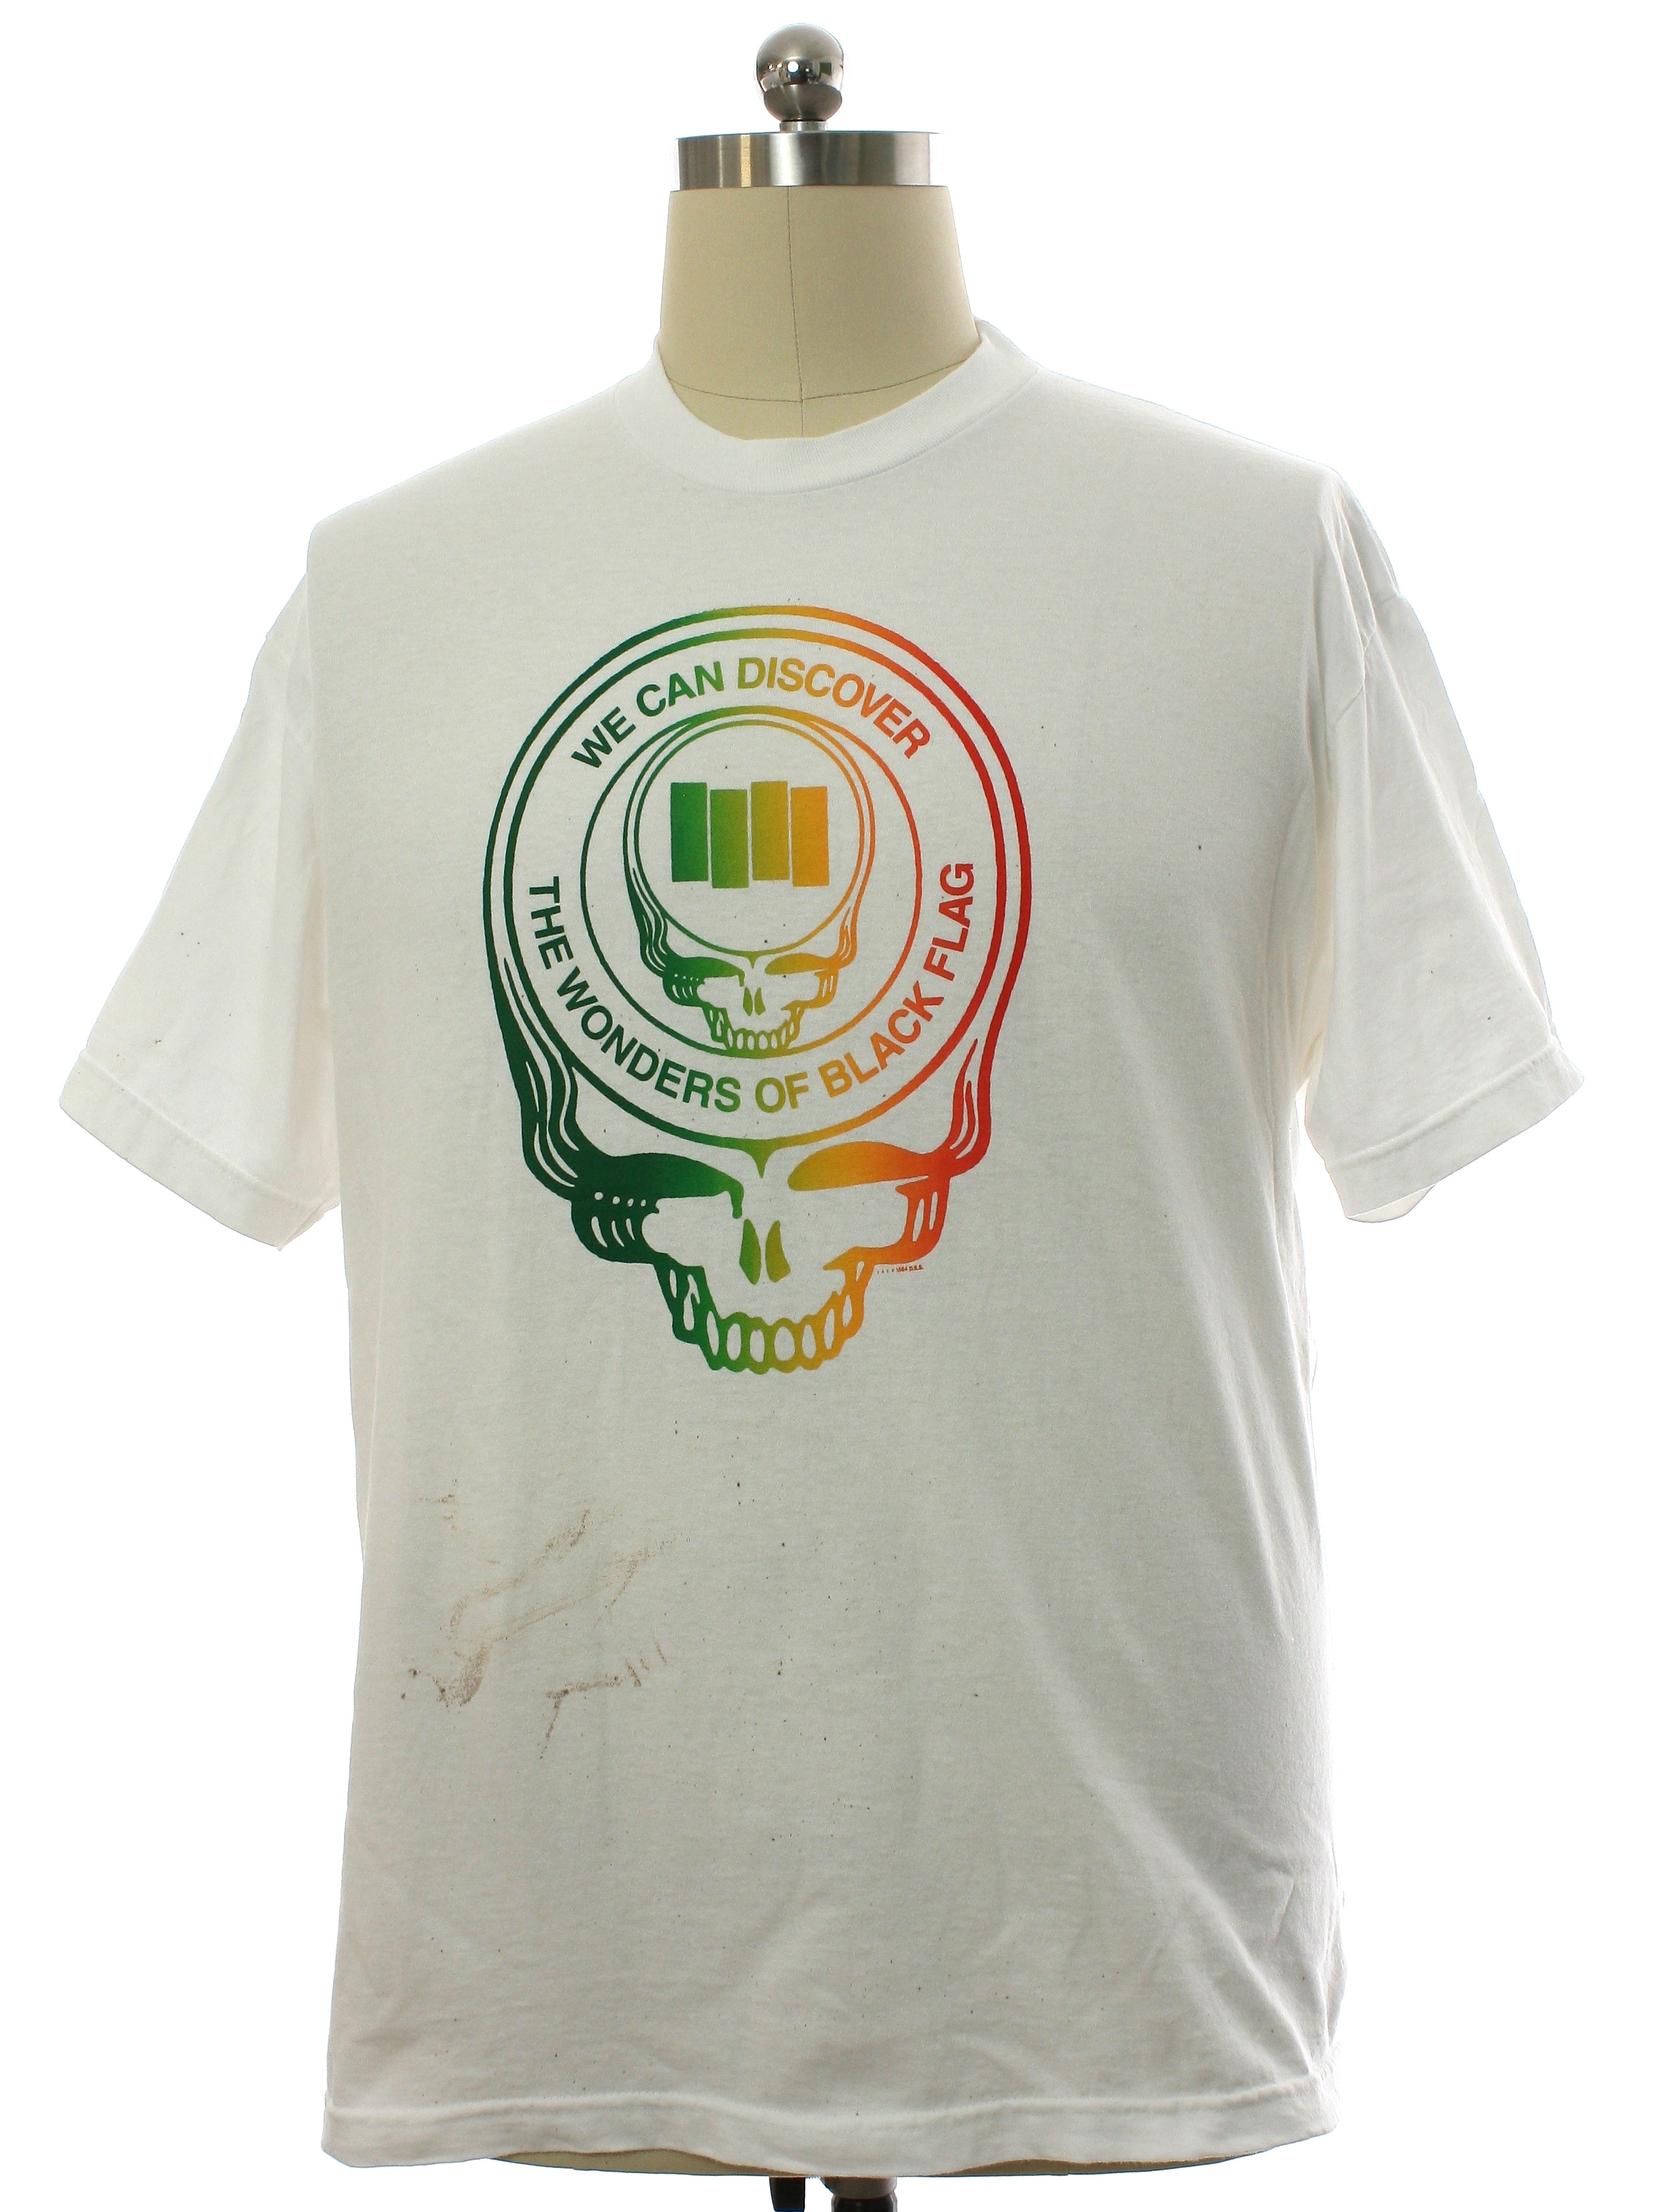 T Shirt 90s Alstyle Apparel And Activewear Made In Mexico Mens White Background With Greens 